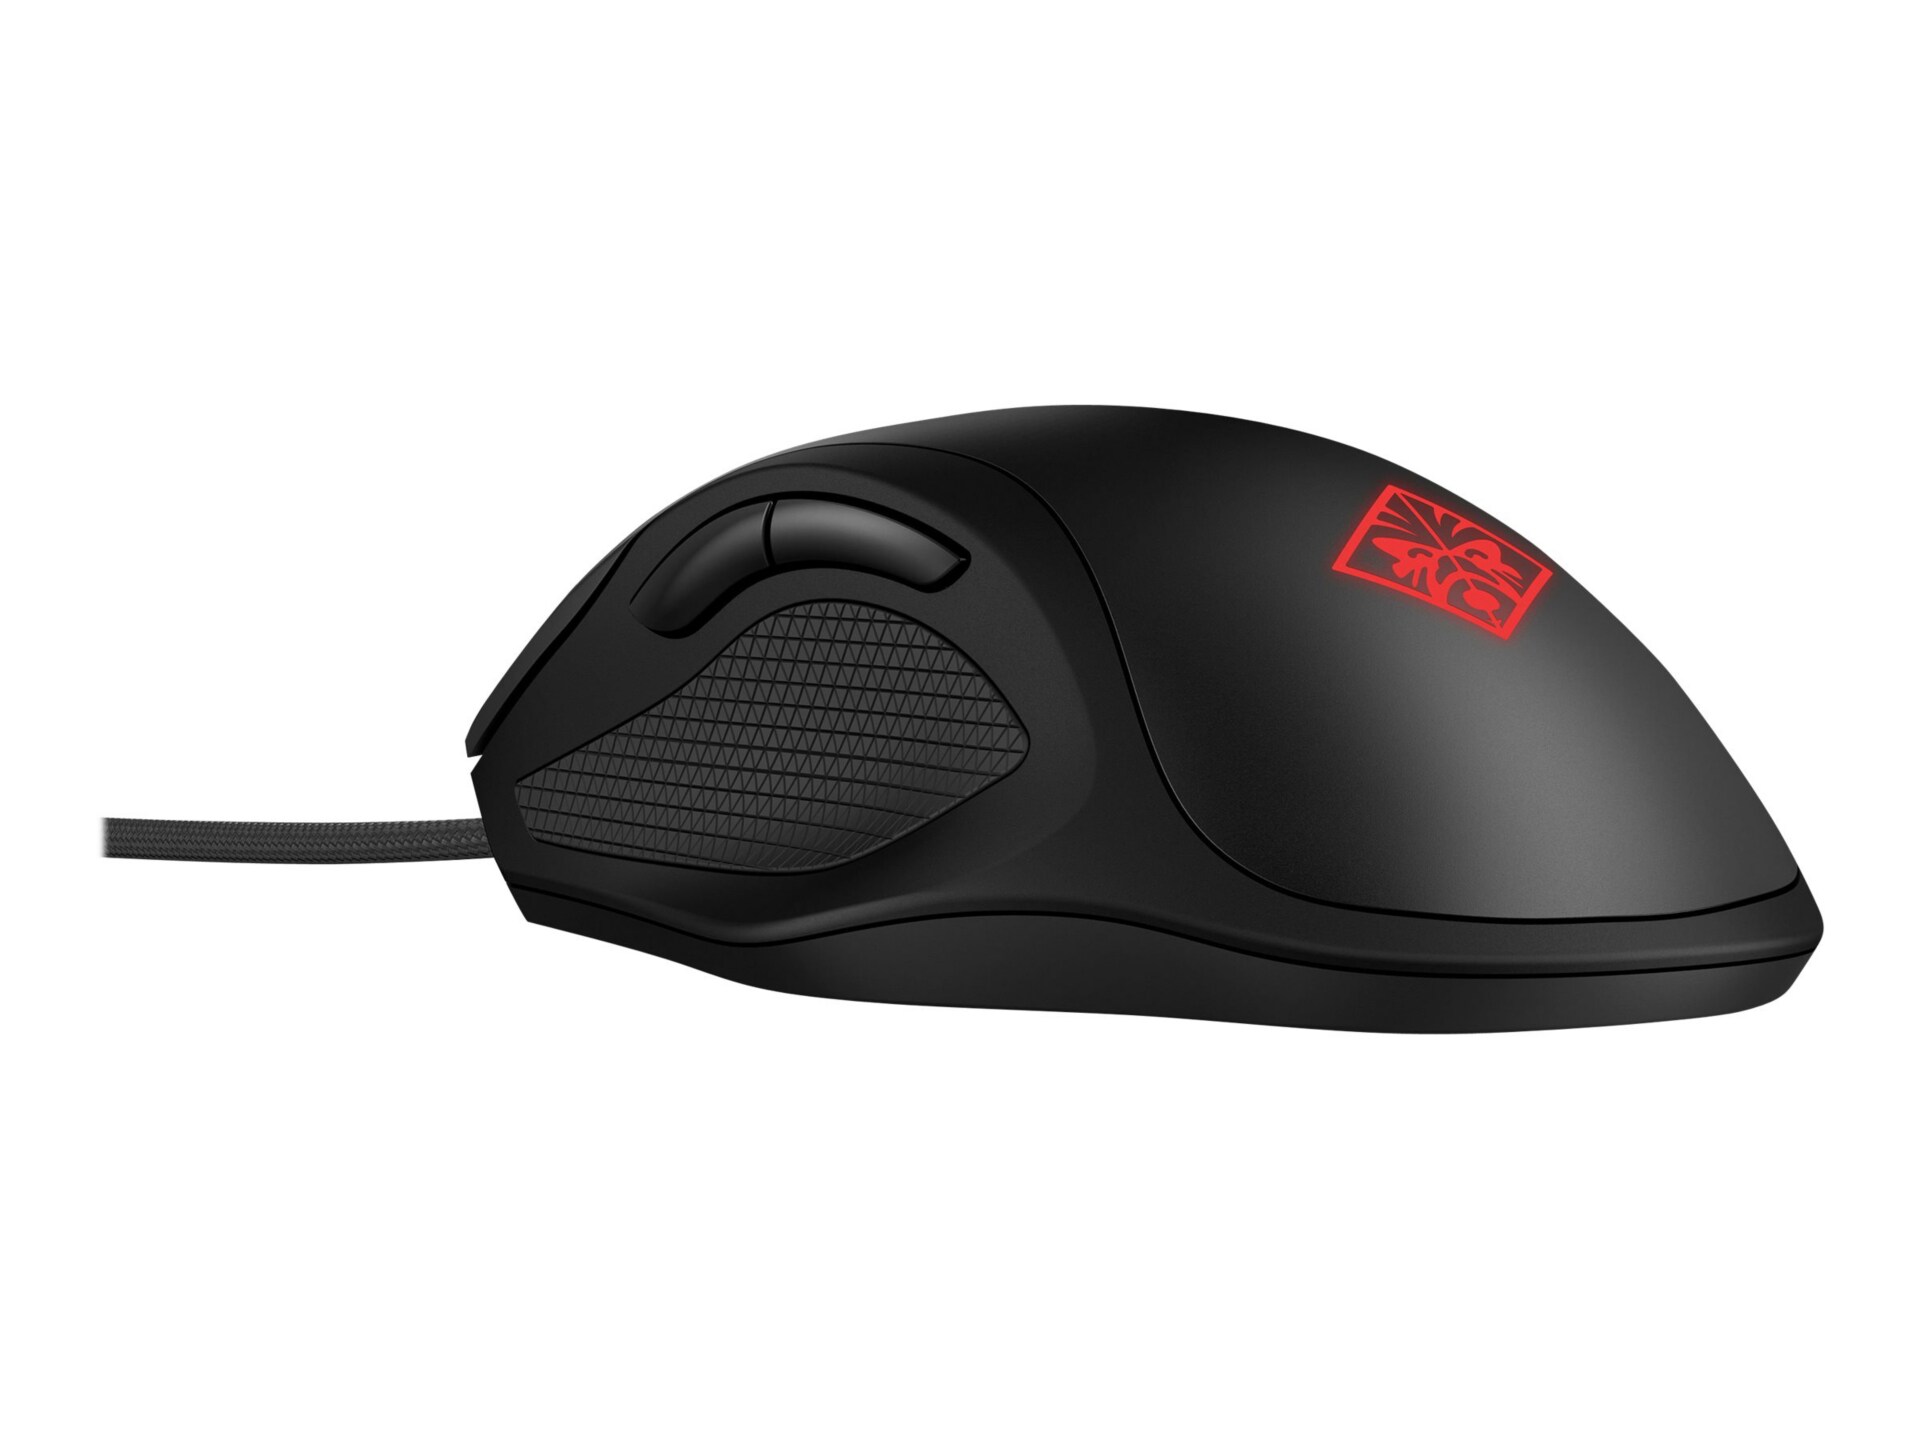 OMEN by HP 600 - mouse - USB